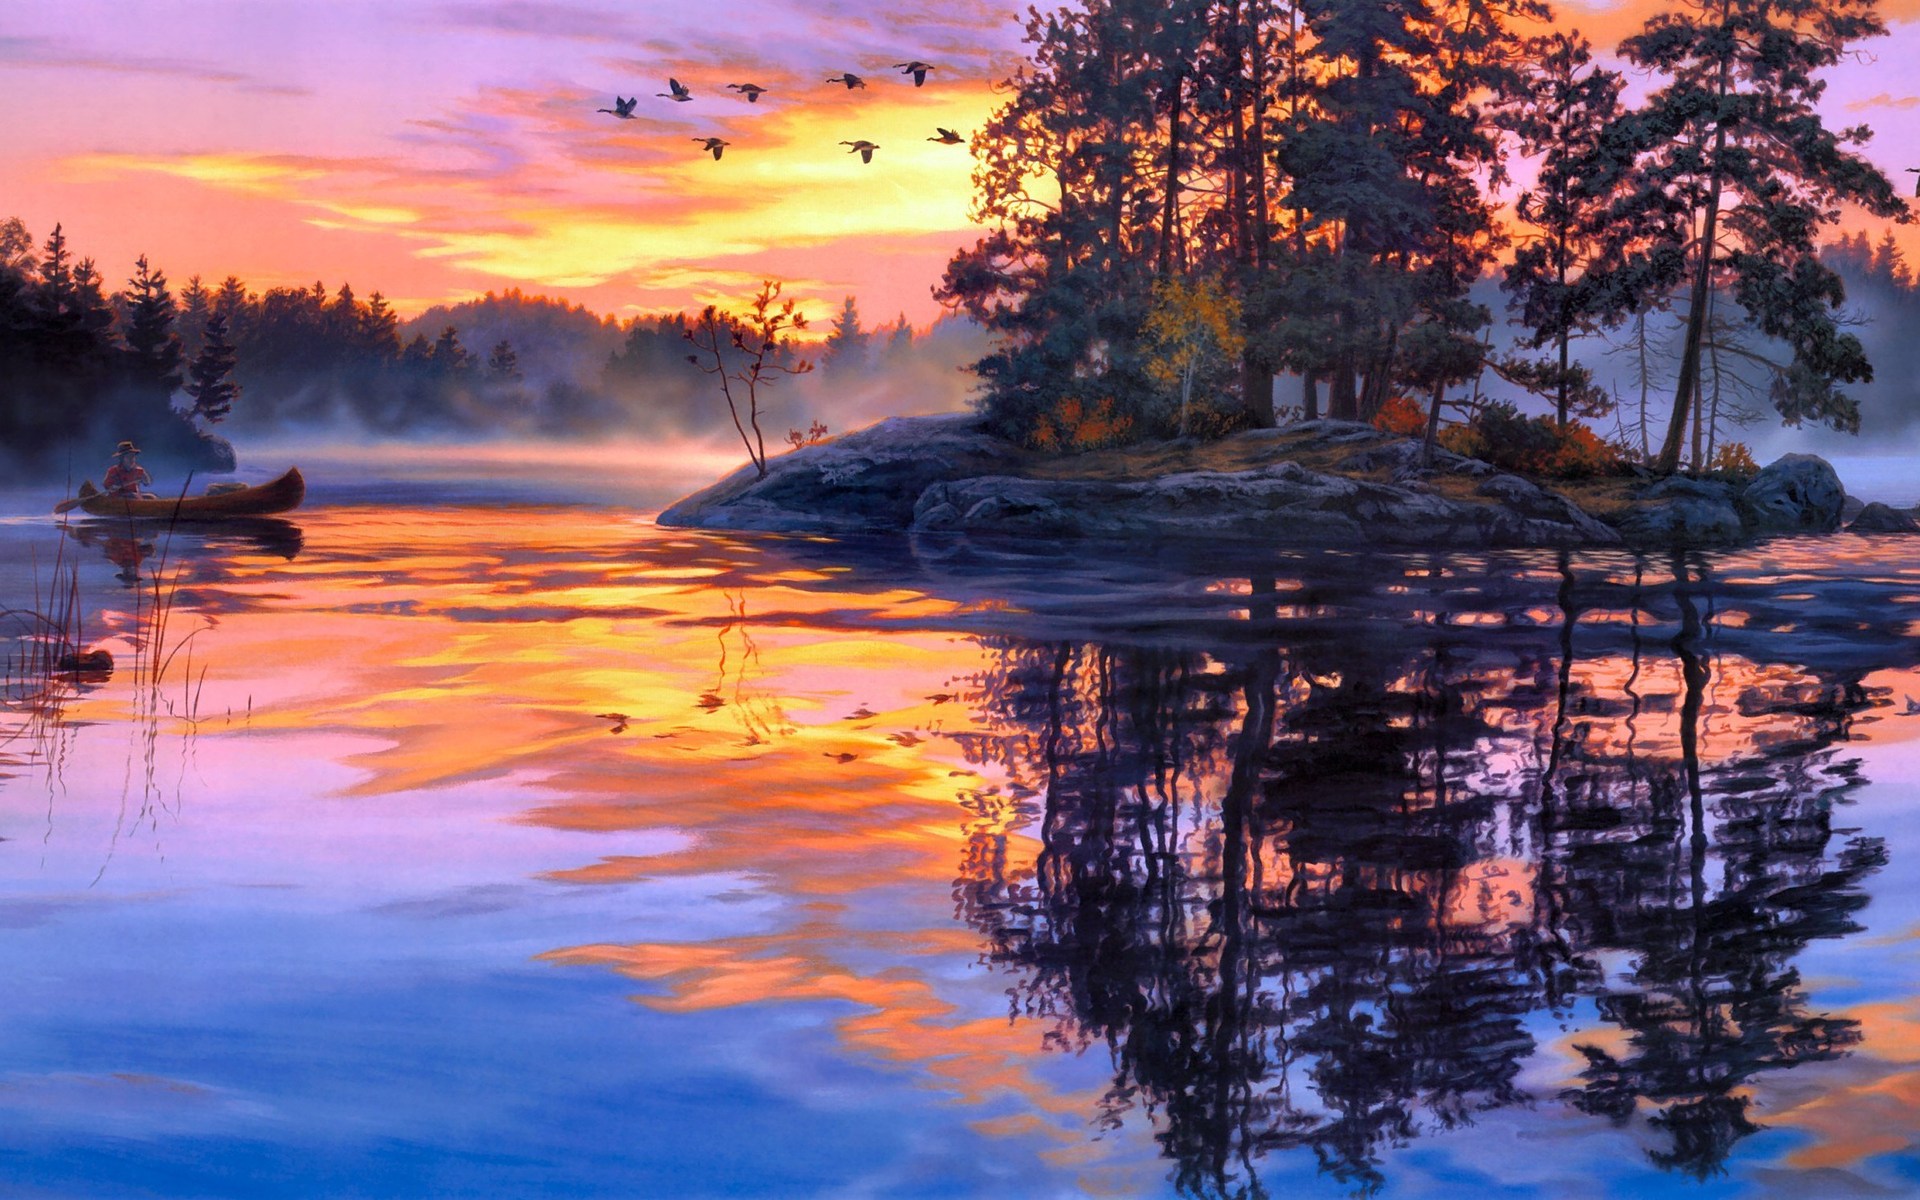 Landscape Scenery Painting HD Wallpaper Res